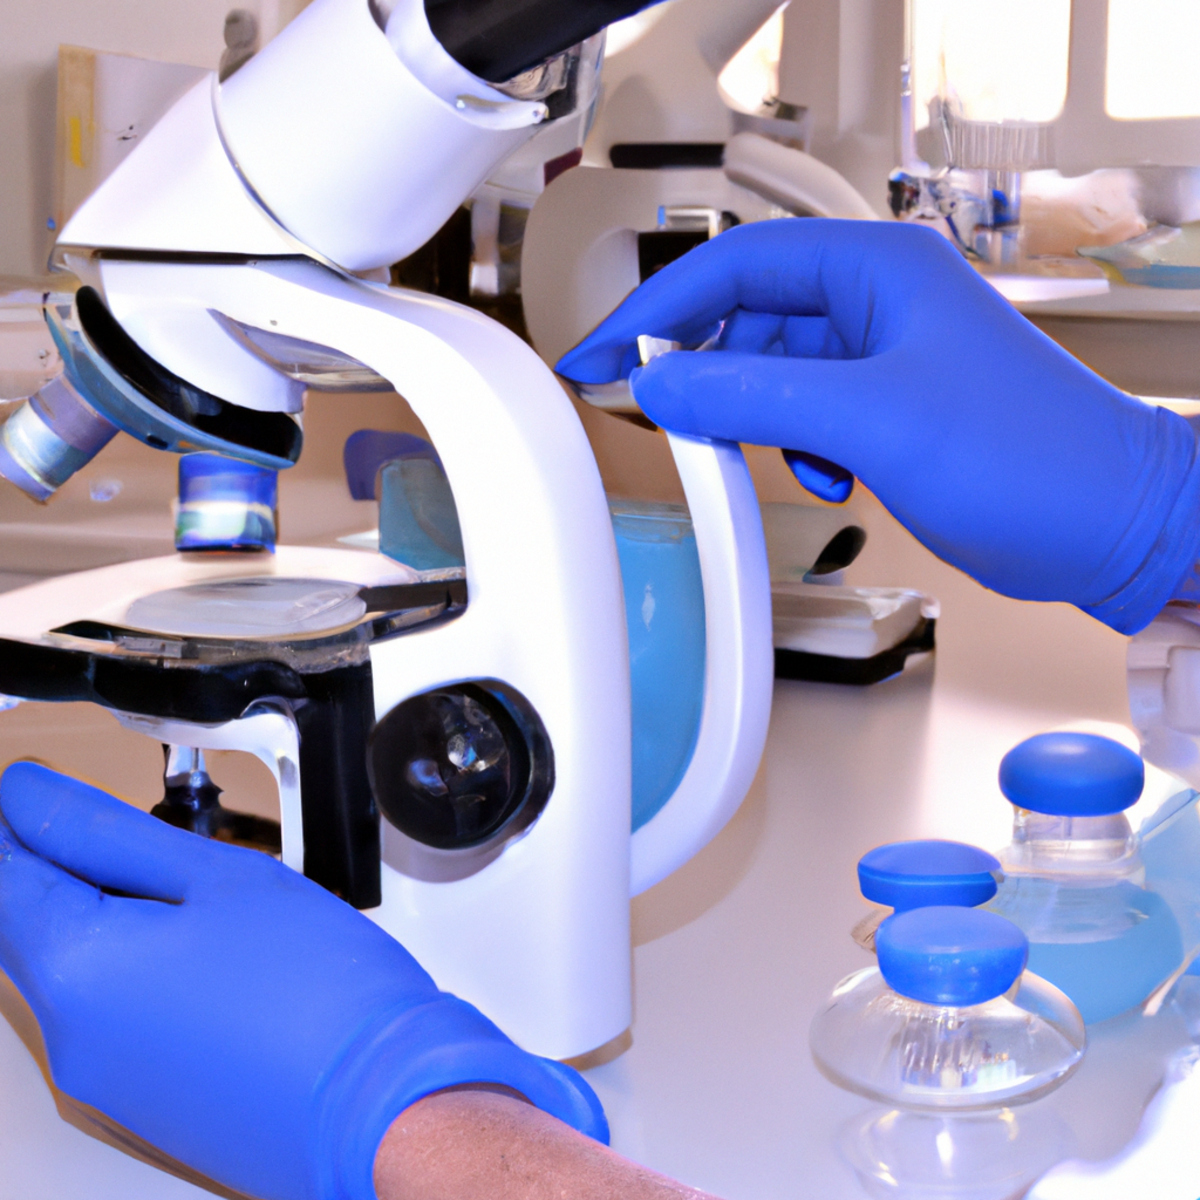 Well-equipped medical lab with scientific apparatus for diagnosing and studying Paraneoplastic Pemphigus.